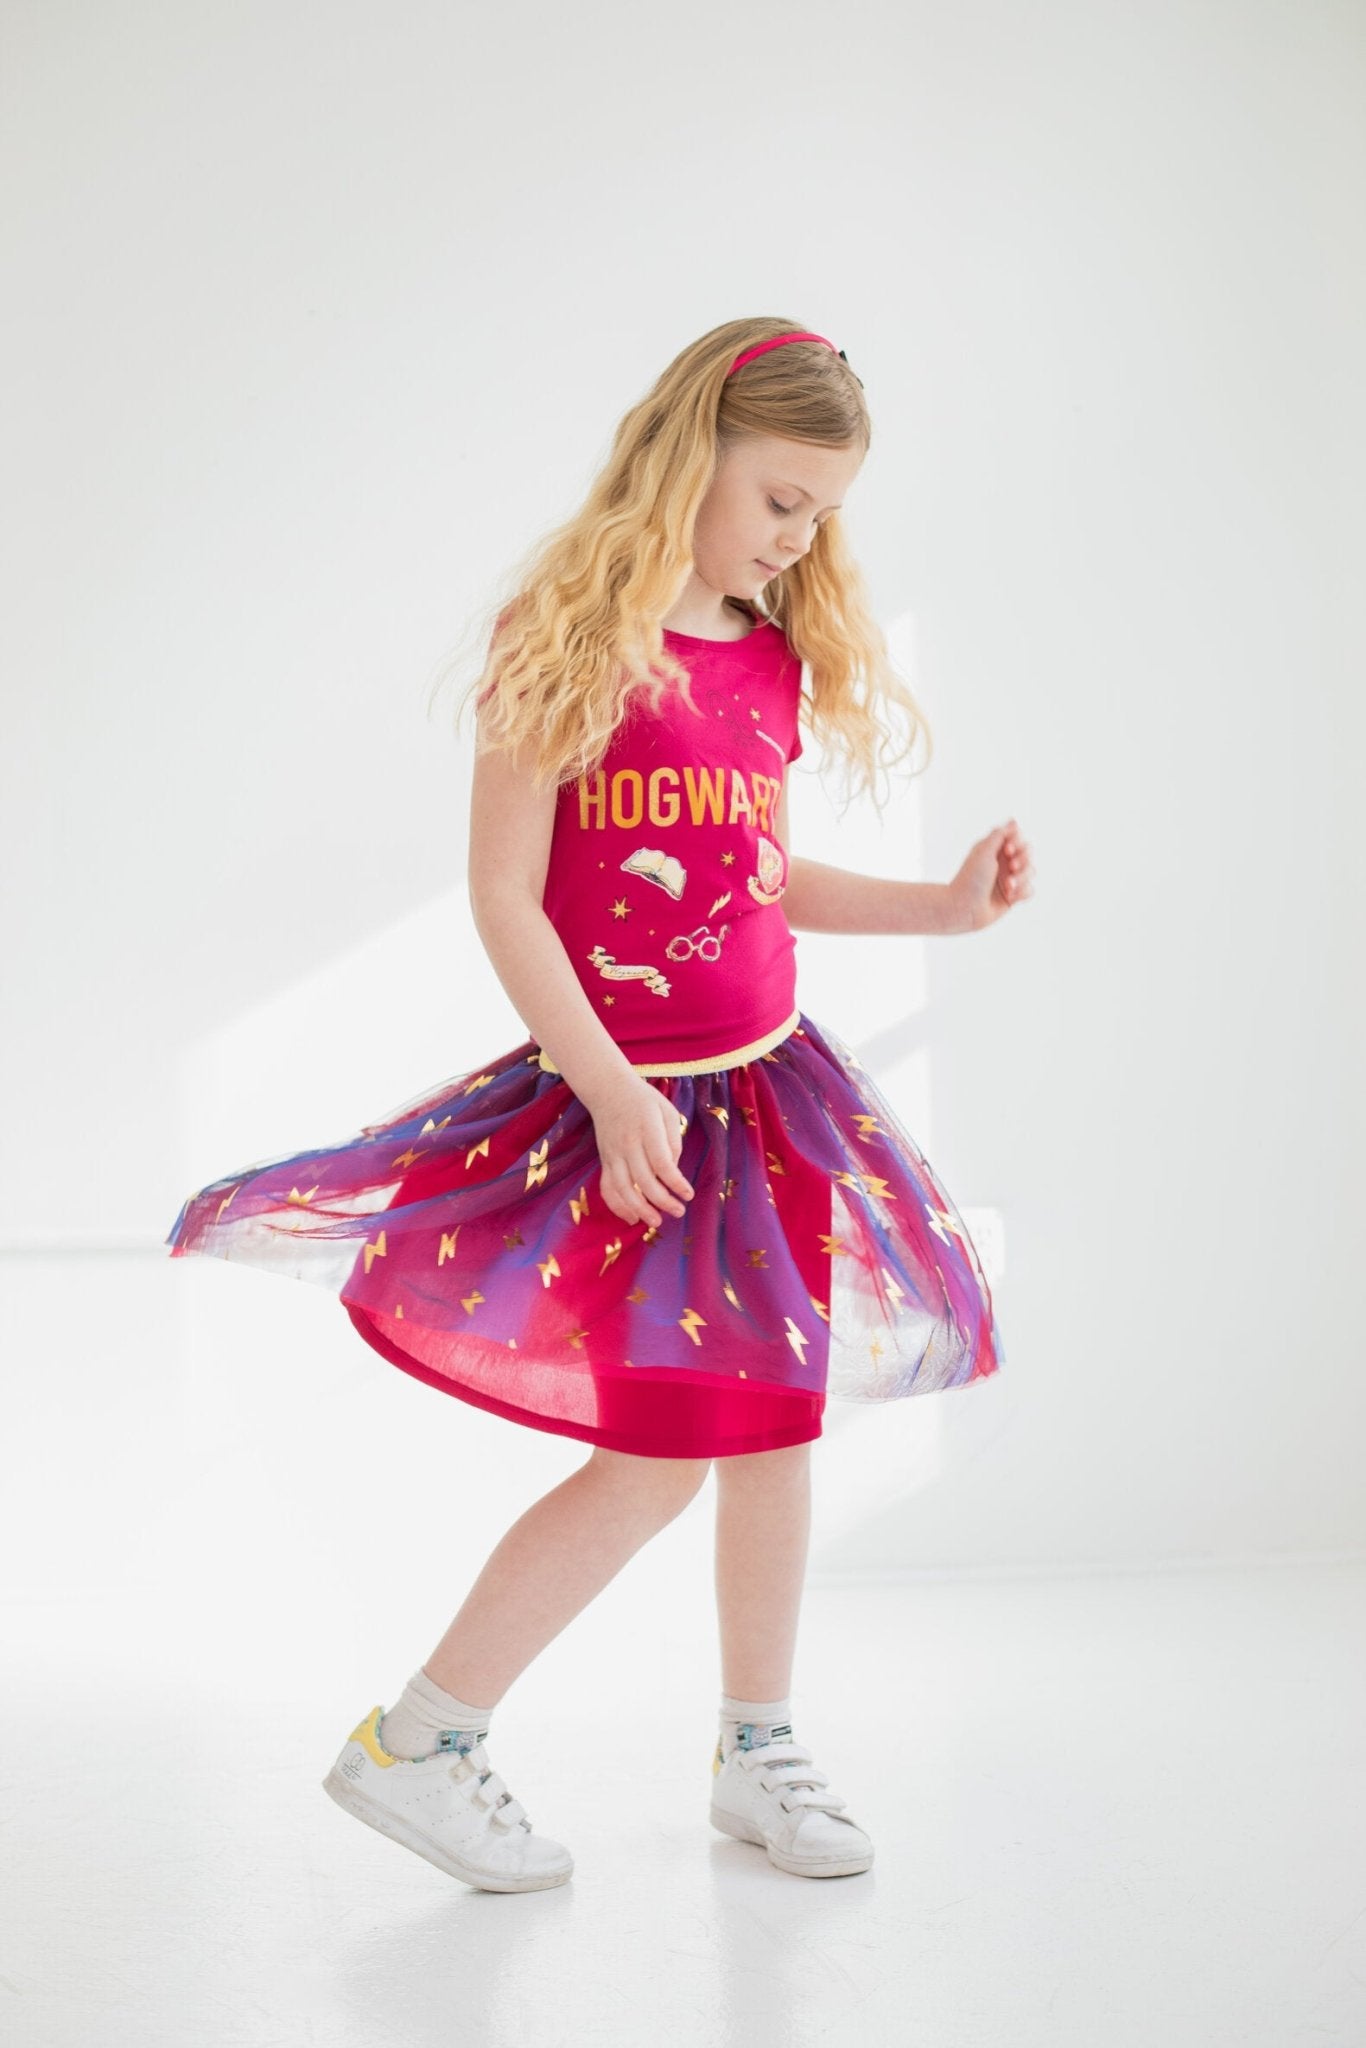 Harry Potter T-Shirt Tulle Skirt and Headband 3 Piece Outfit Set - imagikids